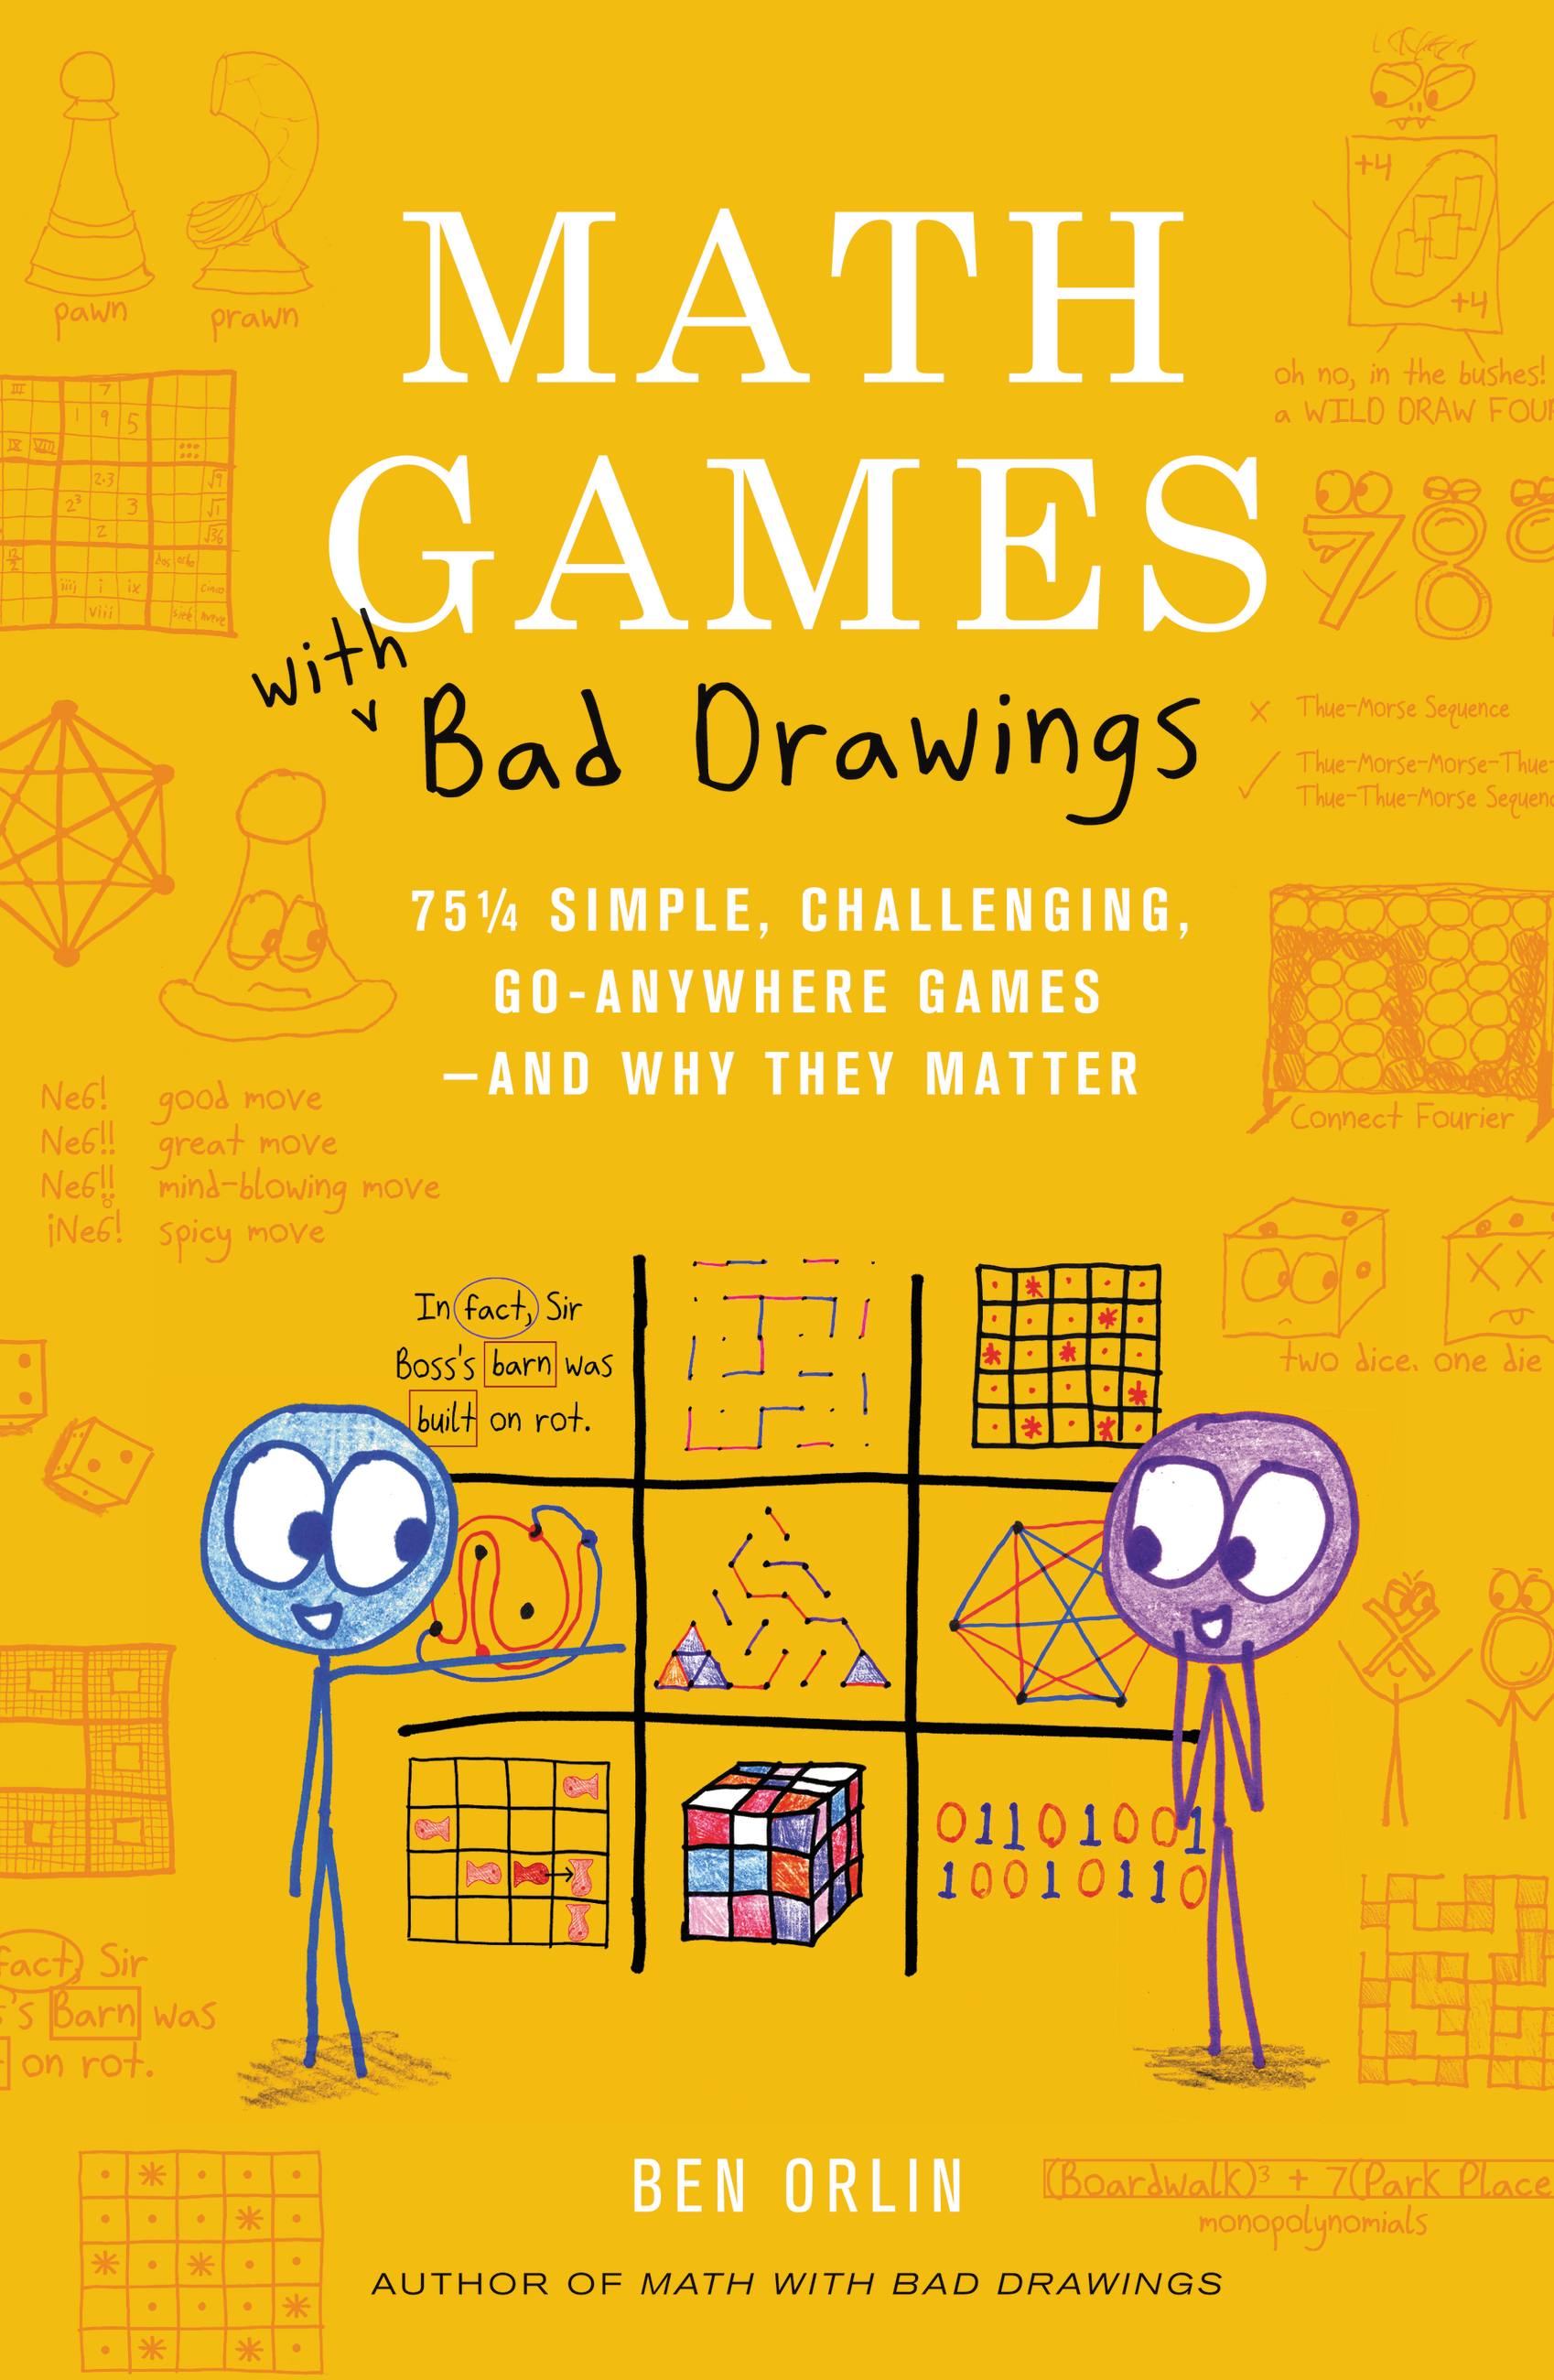 Math Games with Bad Drawings by Ben Orlin Hachette Book Group